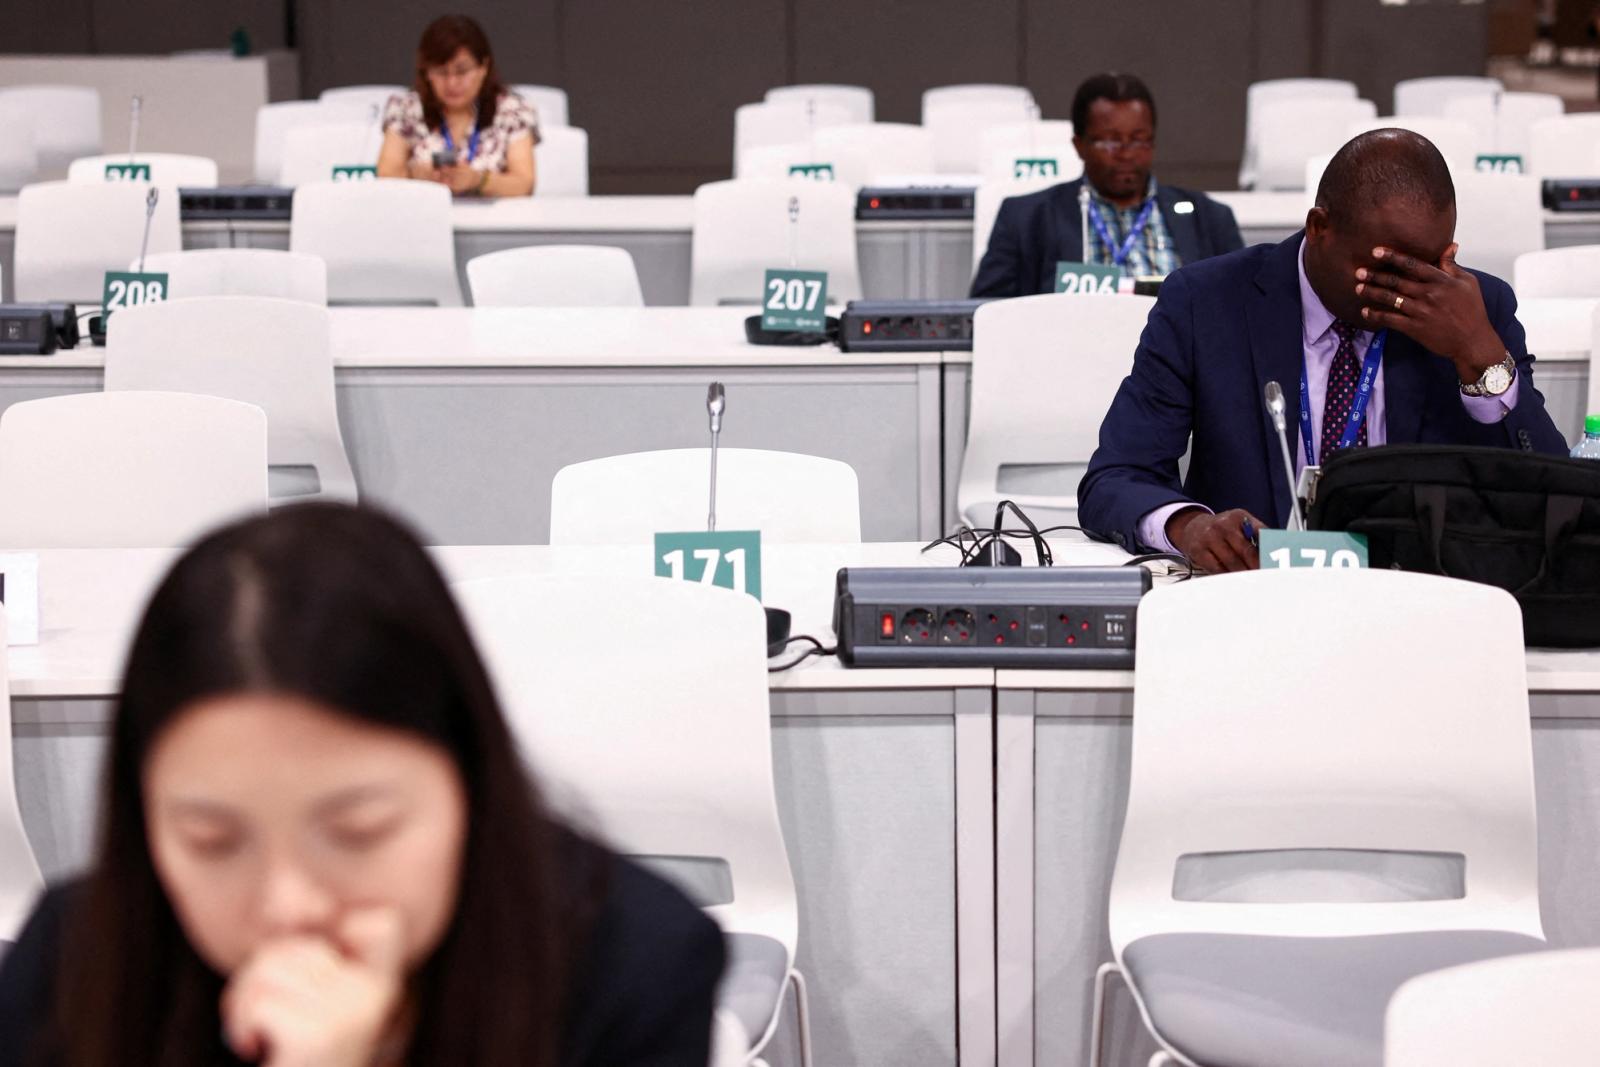 A delegate gestures as he works in between meetings during the final stages of the United Nations Climate Change Conference COP28.